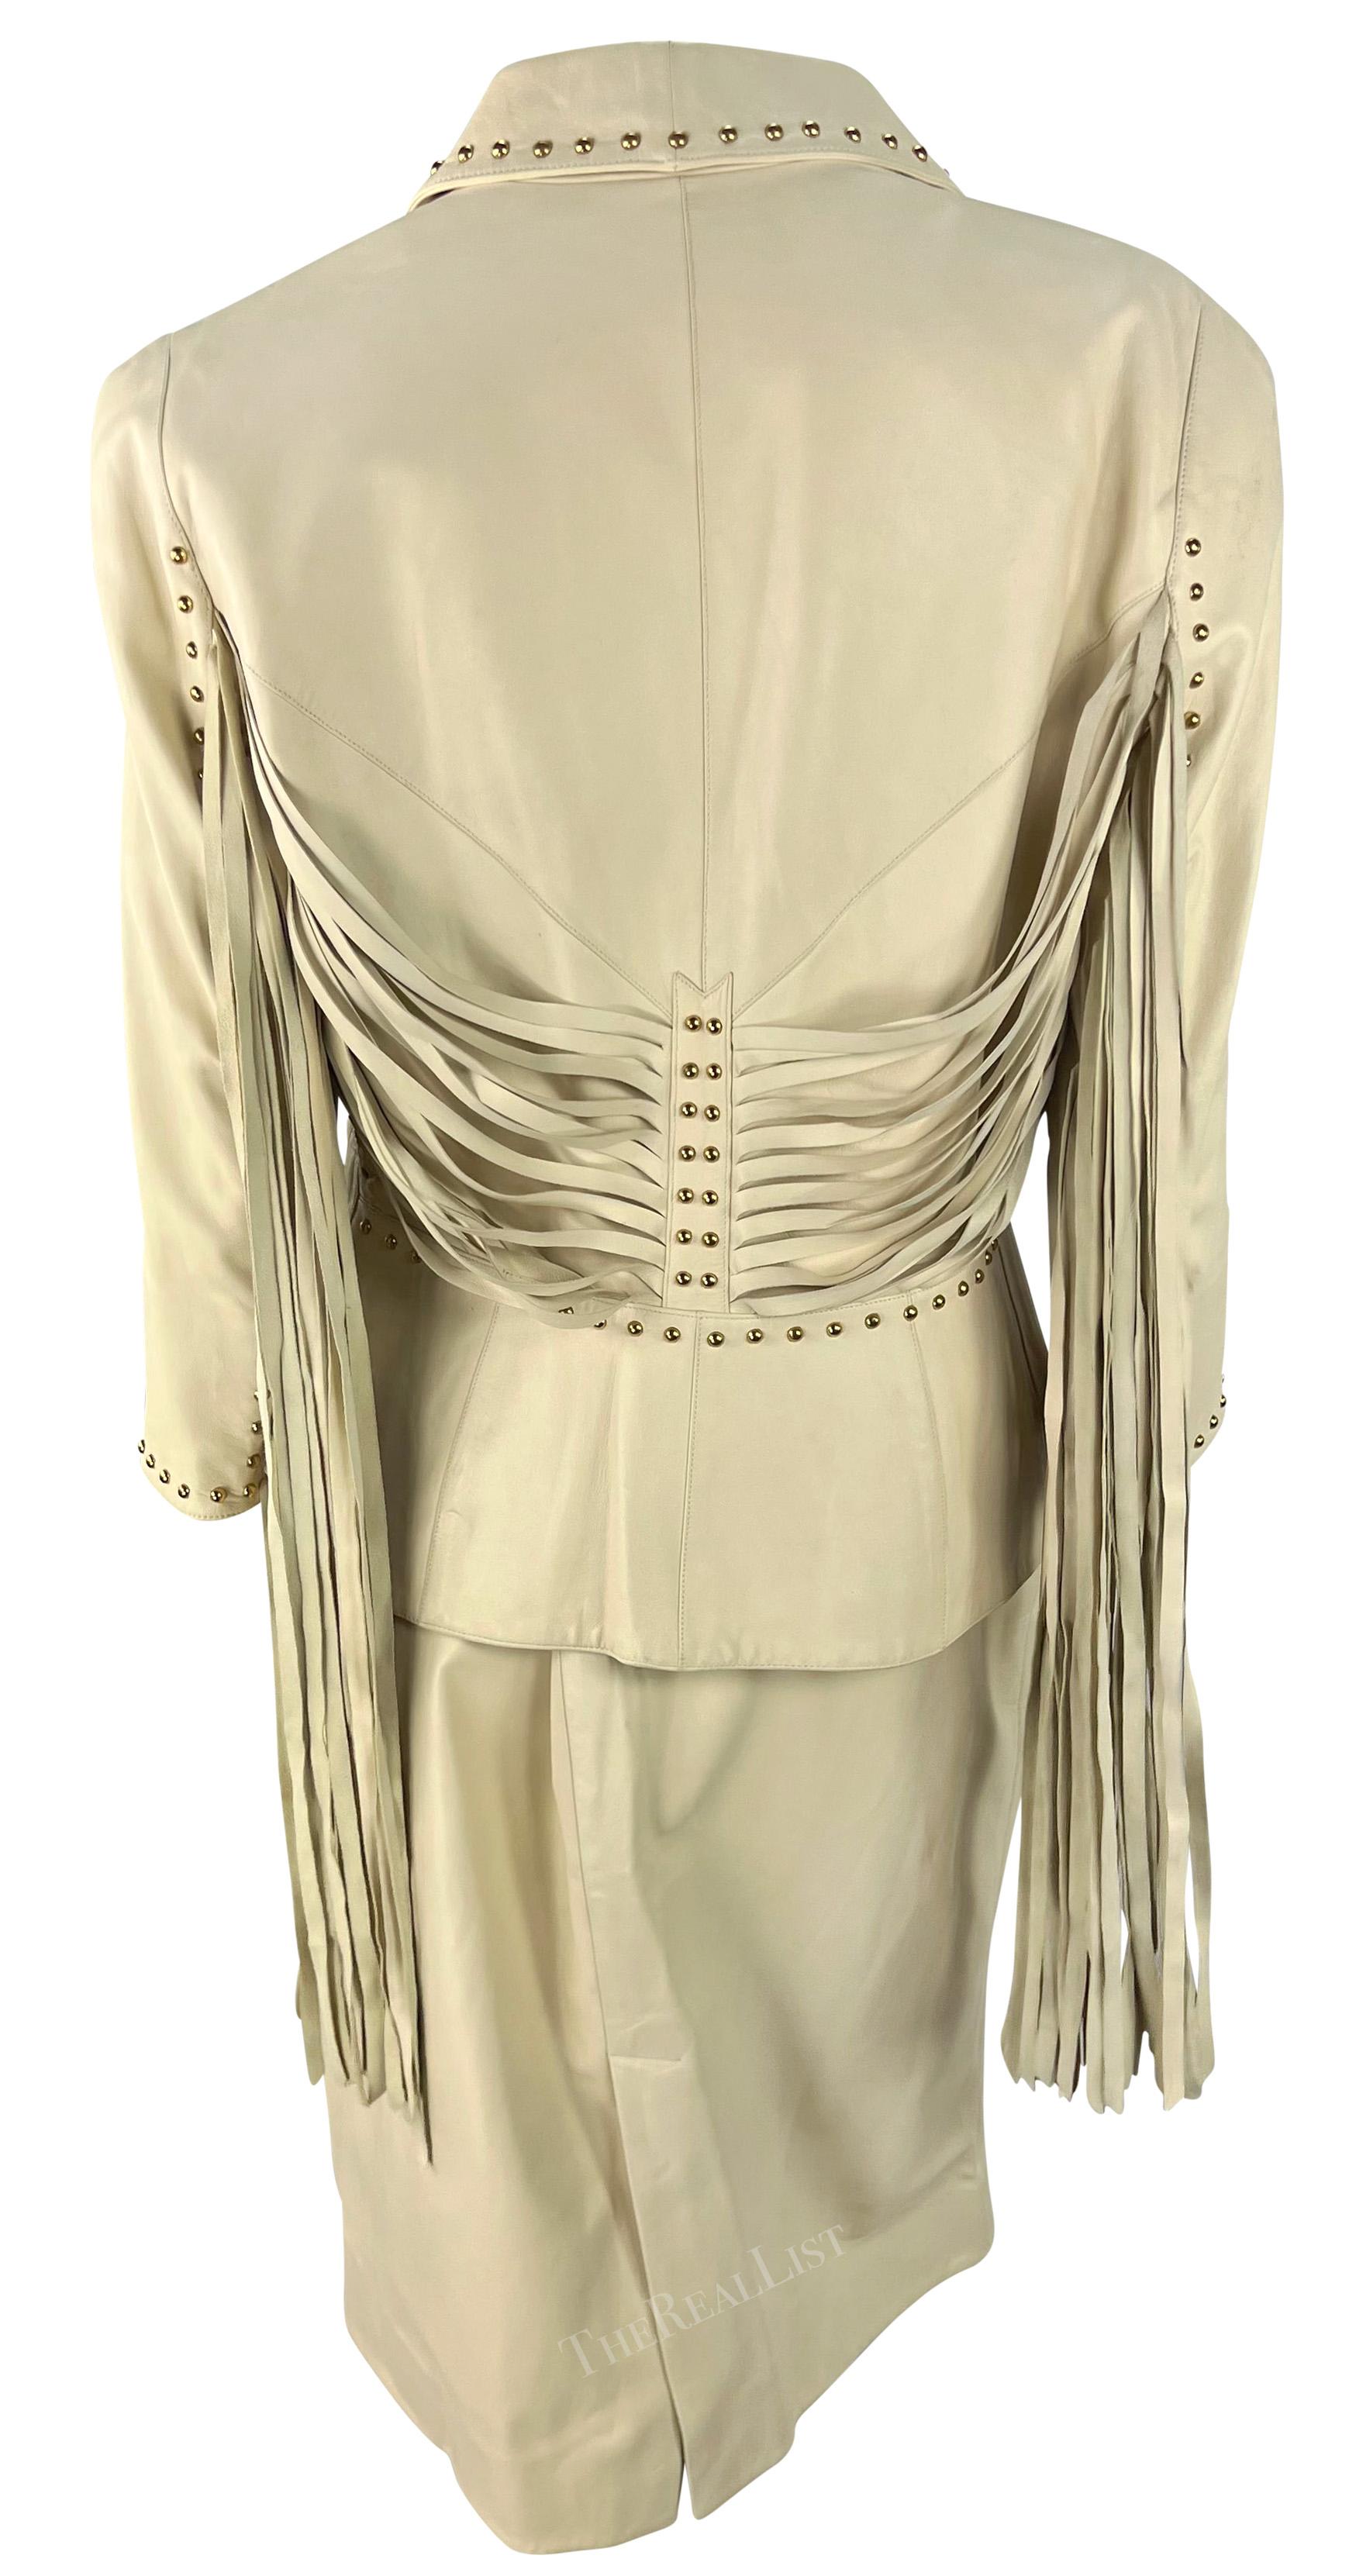 Early 2000s Thierry Mugler Couture Studded Beige Leather Fringe Skirt Suit In Good Condition For Sale In West Hollywood, CA